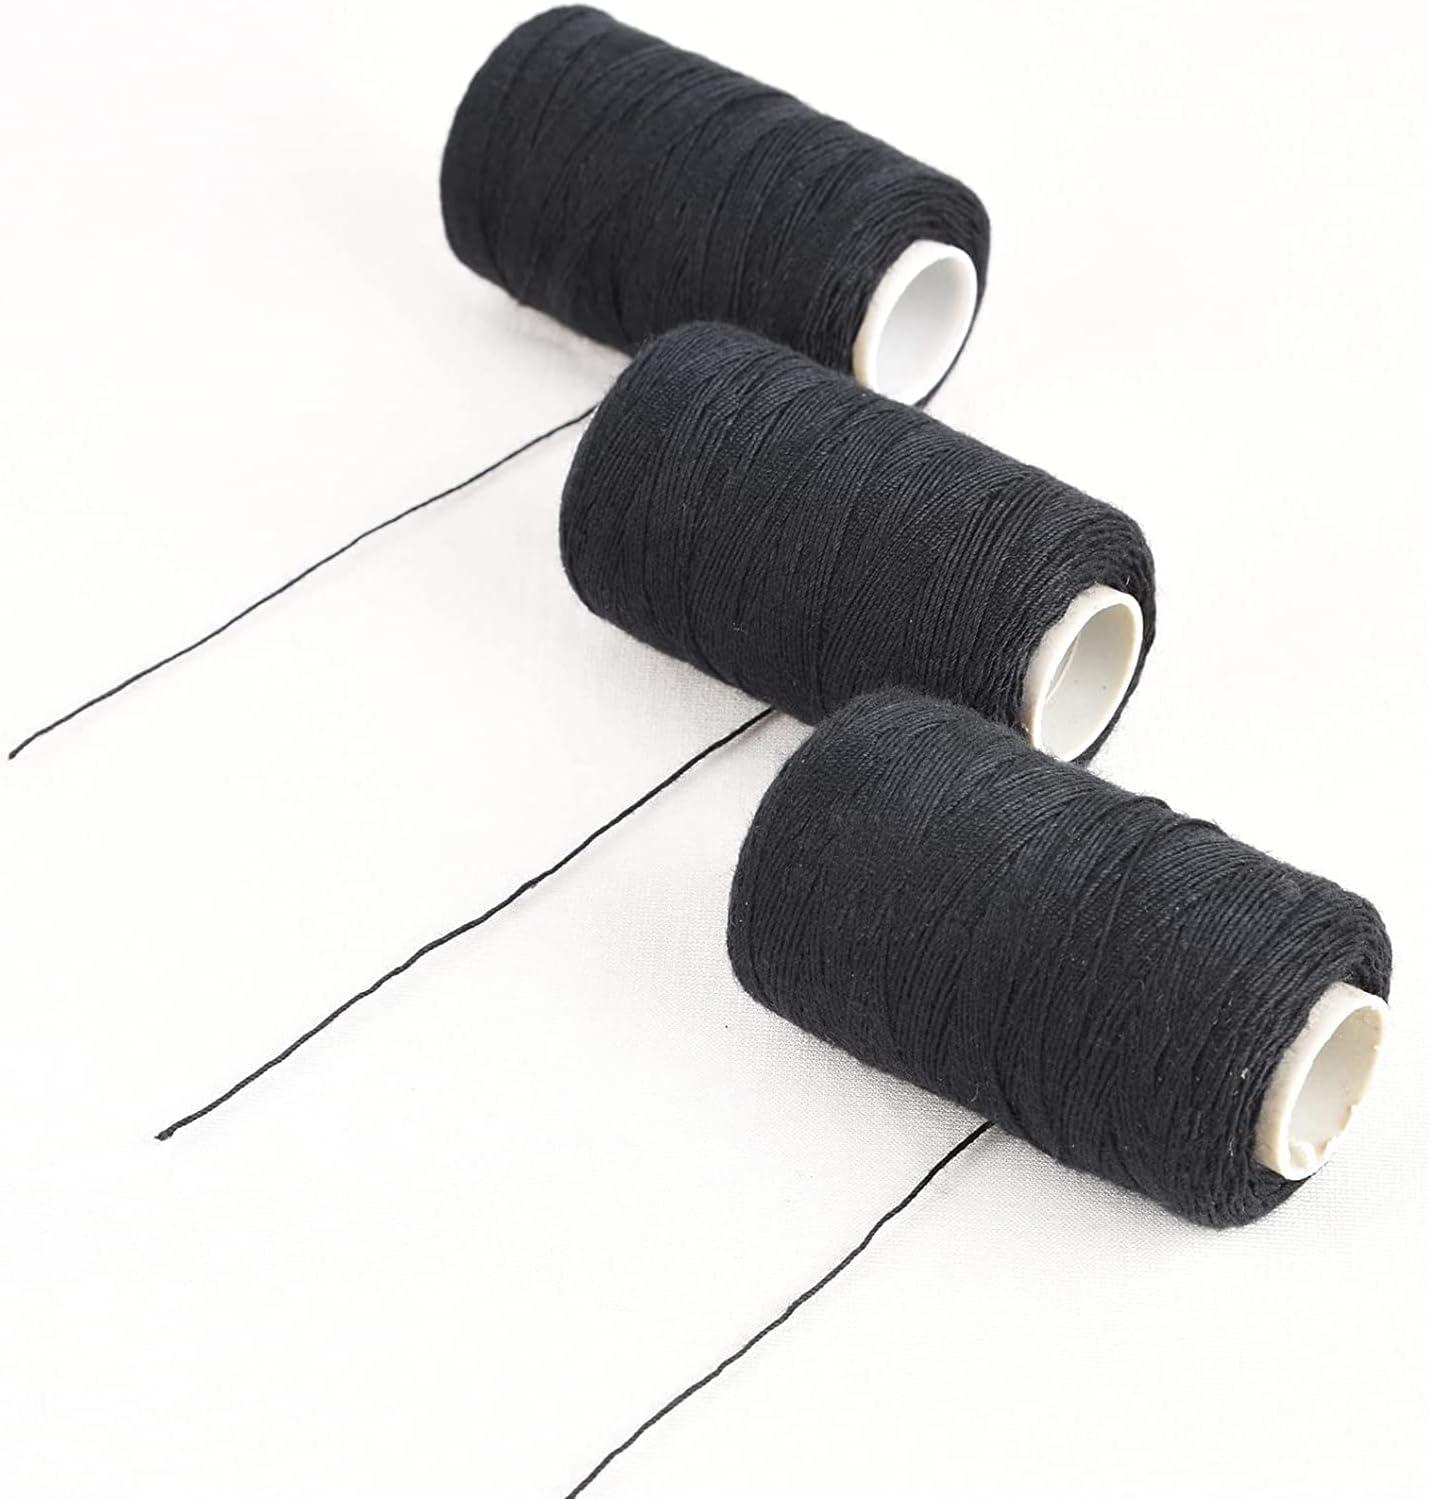 Fyydes Black Hair Weaving Thread Sewing Thread Making Hair Salon Weft Thick  Black Thread with 3 Needles 